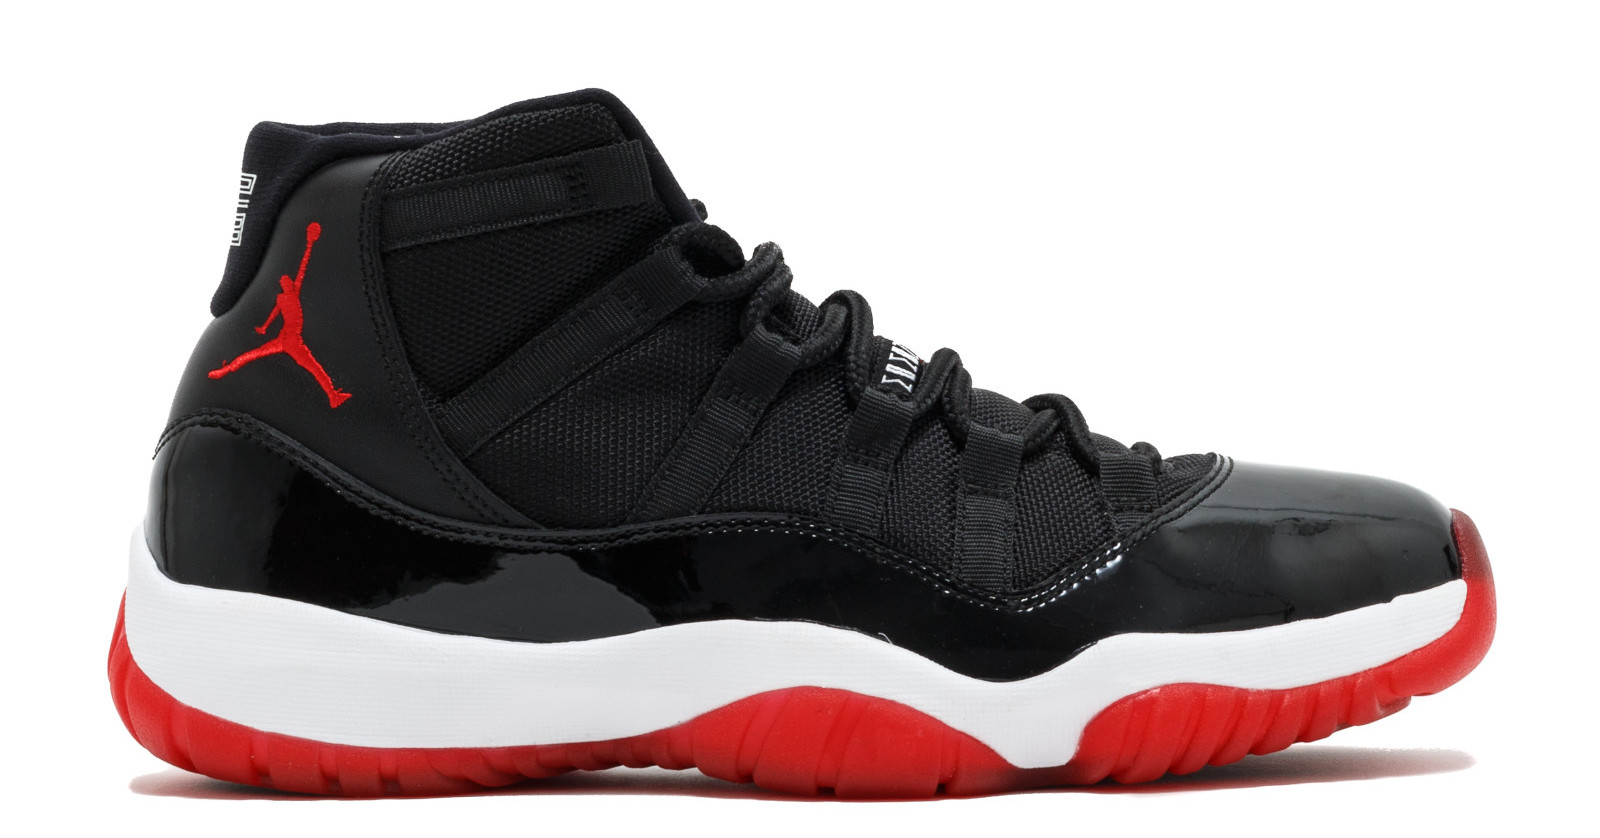 23 Things You May Not Know About Air Jordans